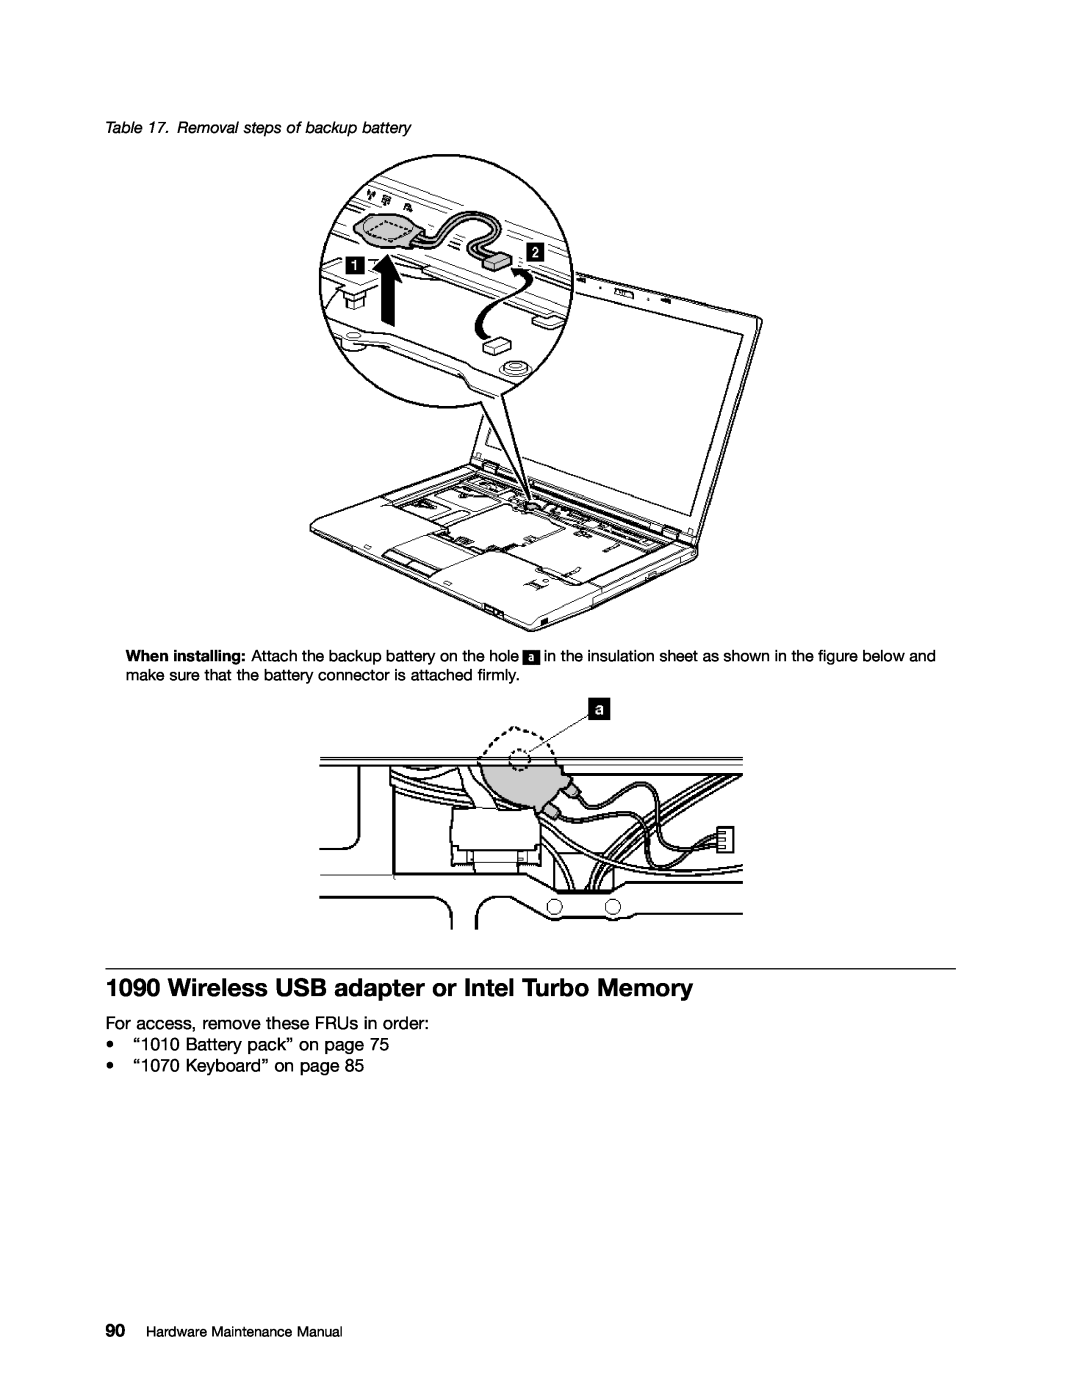 IBM T400S, T410S Wireless USB adapter or Intel Turbo Memory, Removal steps of backup battery, Hardware Maintenance Manual 